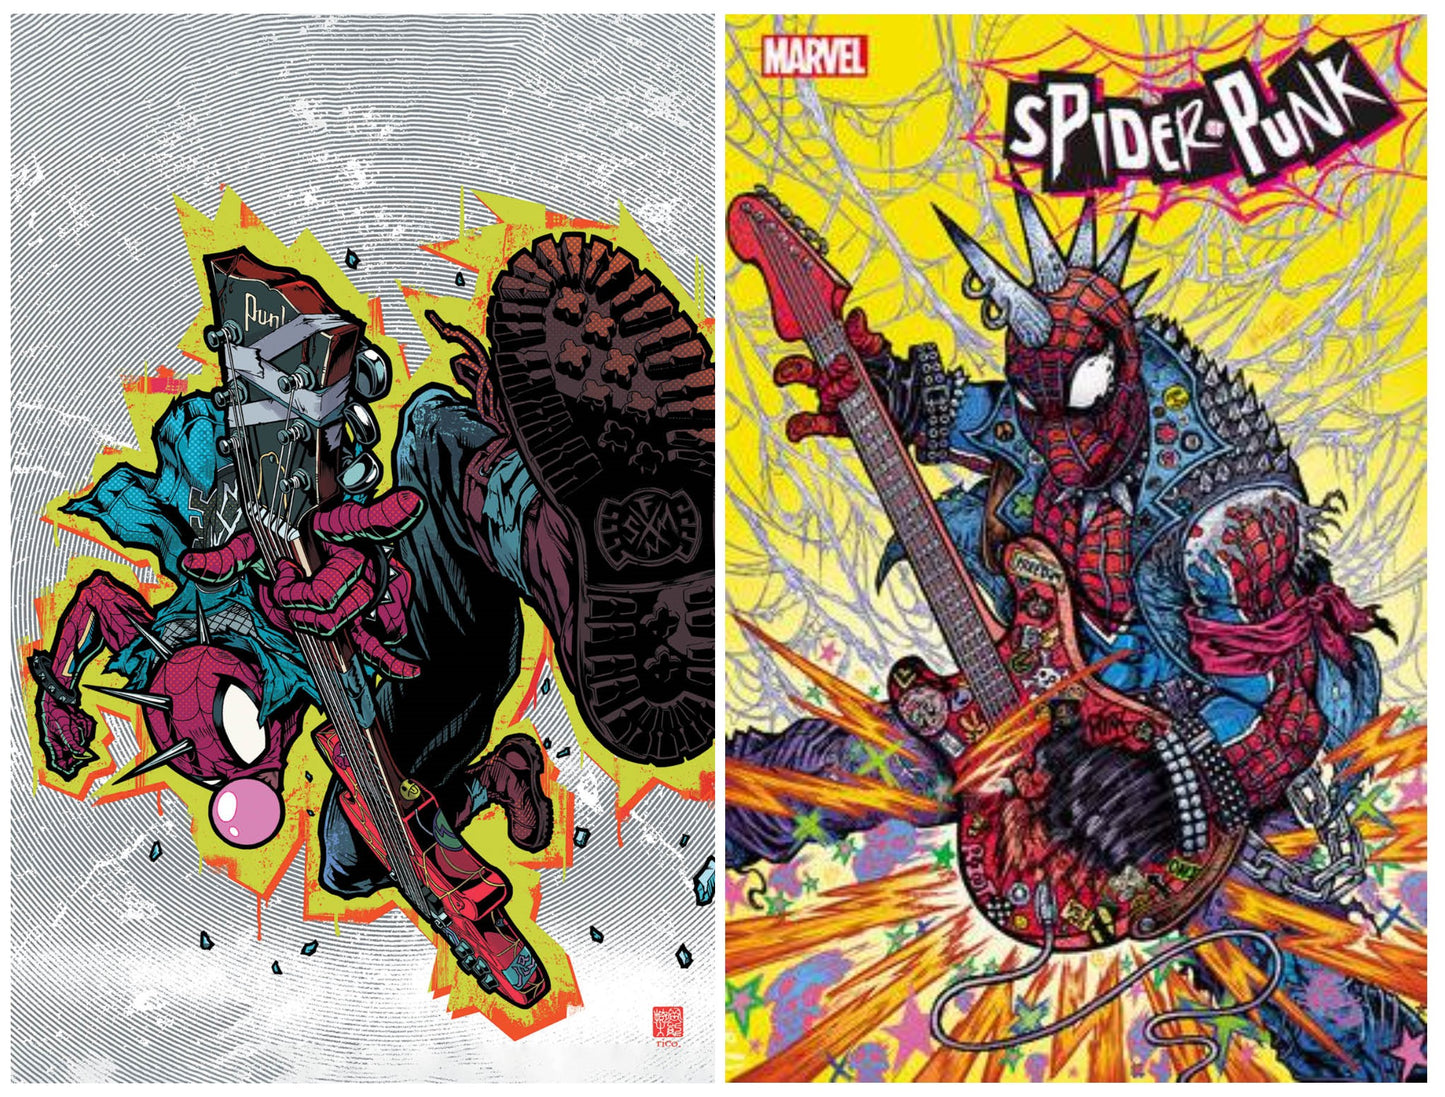 SPIDER-PUNK ARMS RACE #1 TAKASHI OKAZAKI VIRGIN VARIANT LIMITED TO 500 COPIES WITH NUMBERED COA + 1:25 VARIANT